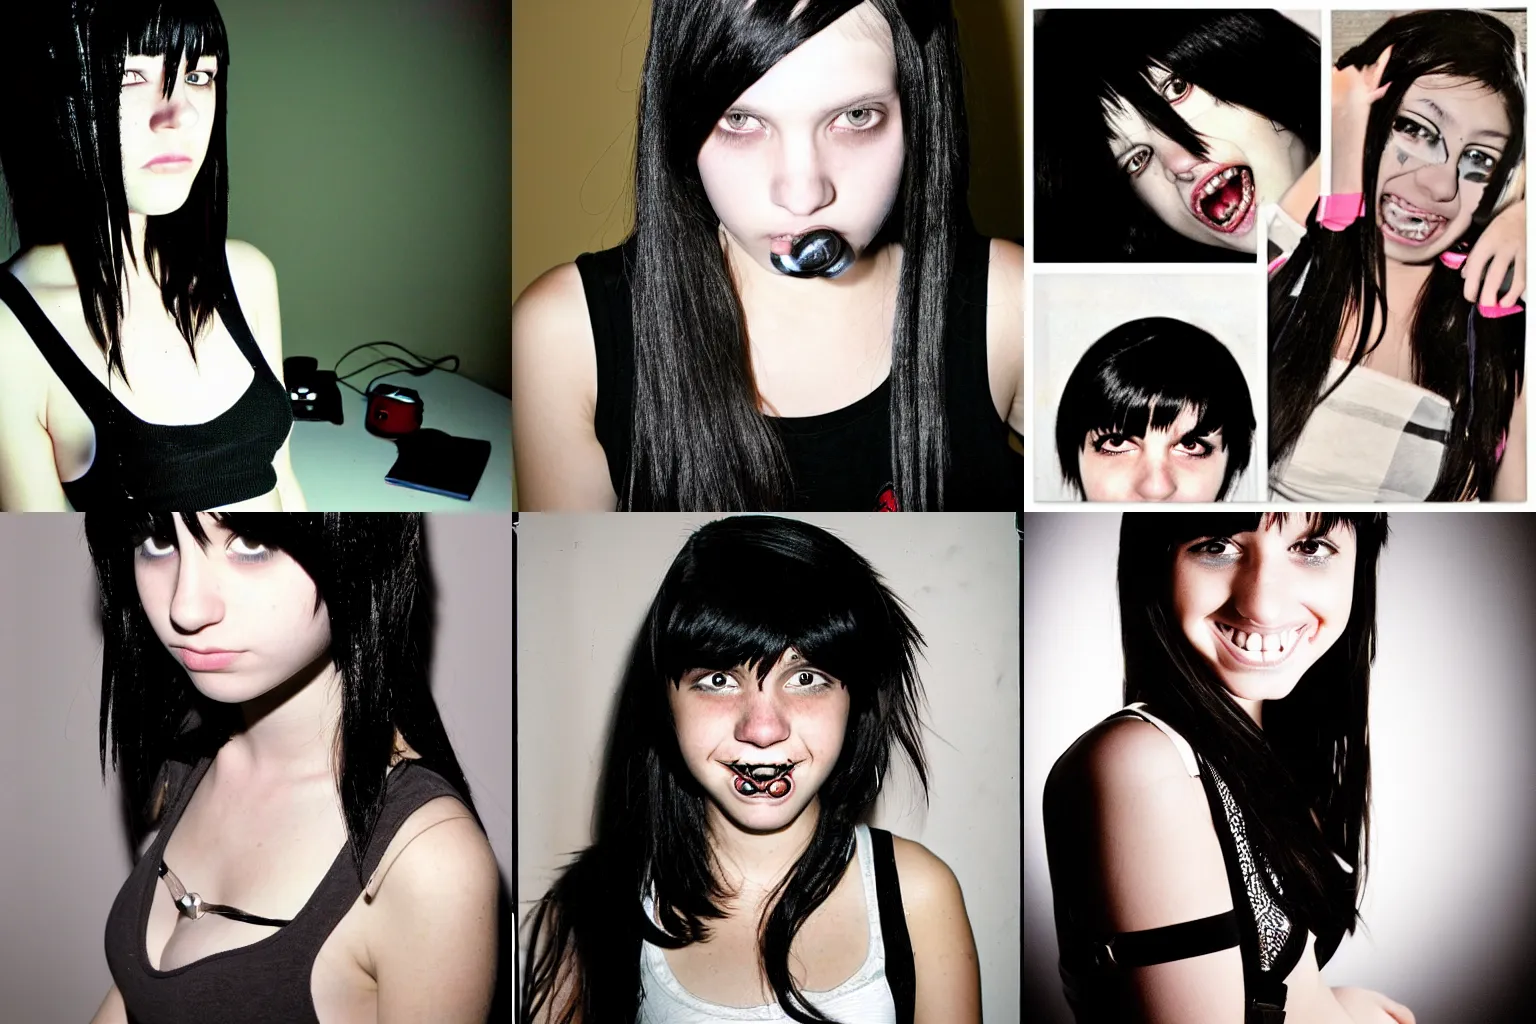 Prompt: 2006 photograph of an emo girl with braces, pale, black hair, camera flash on